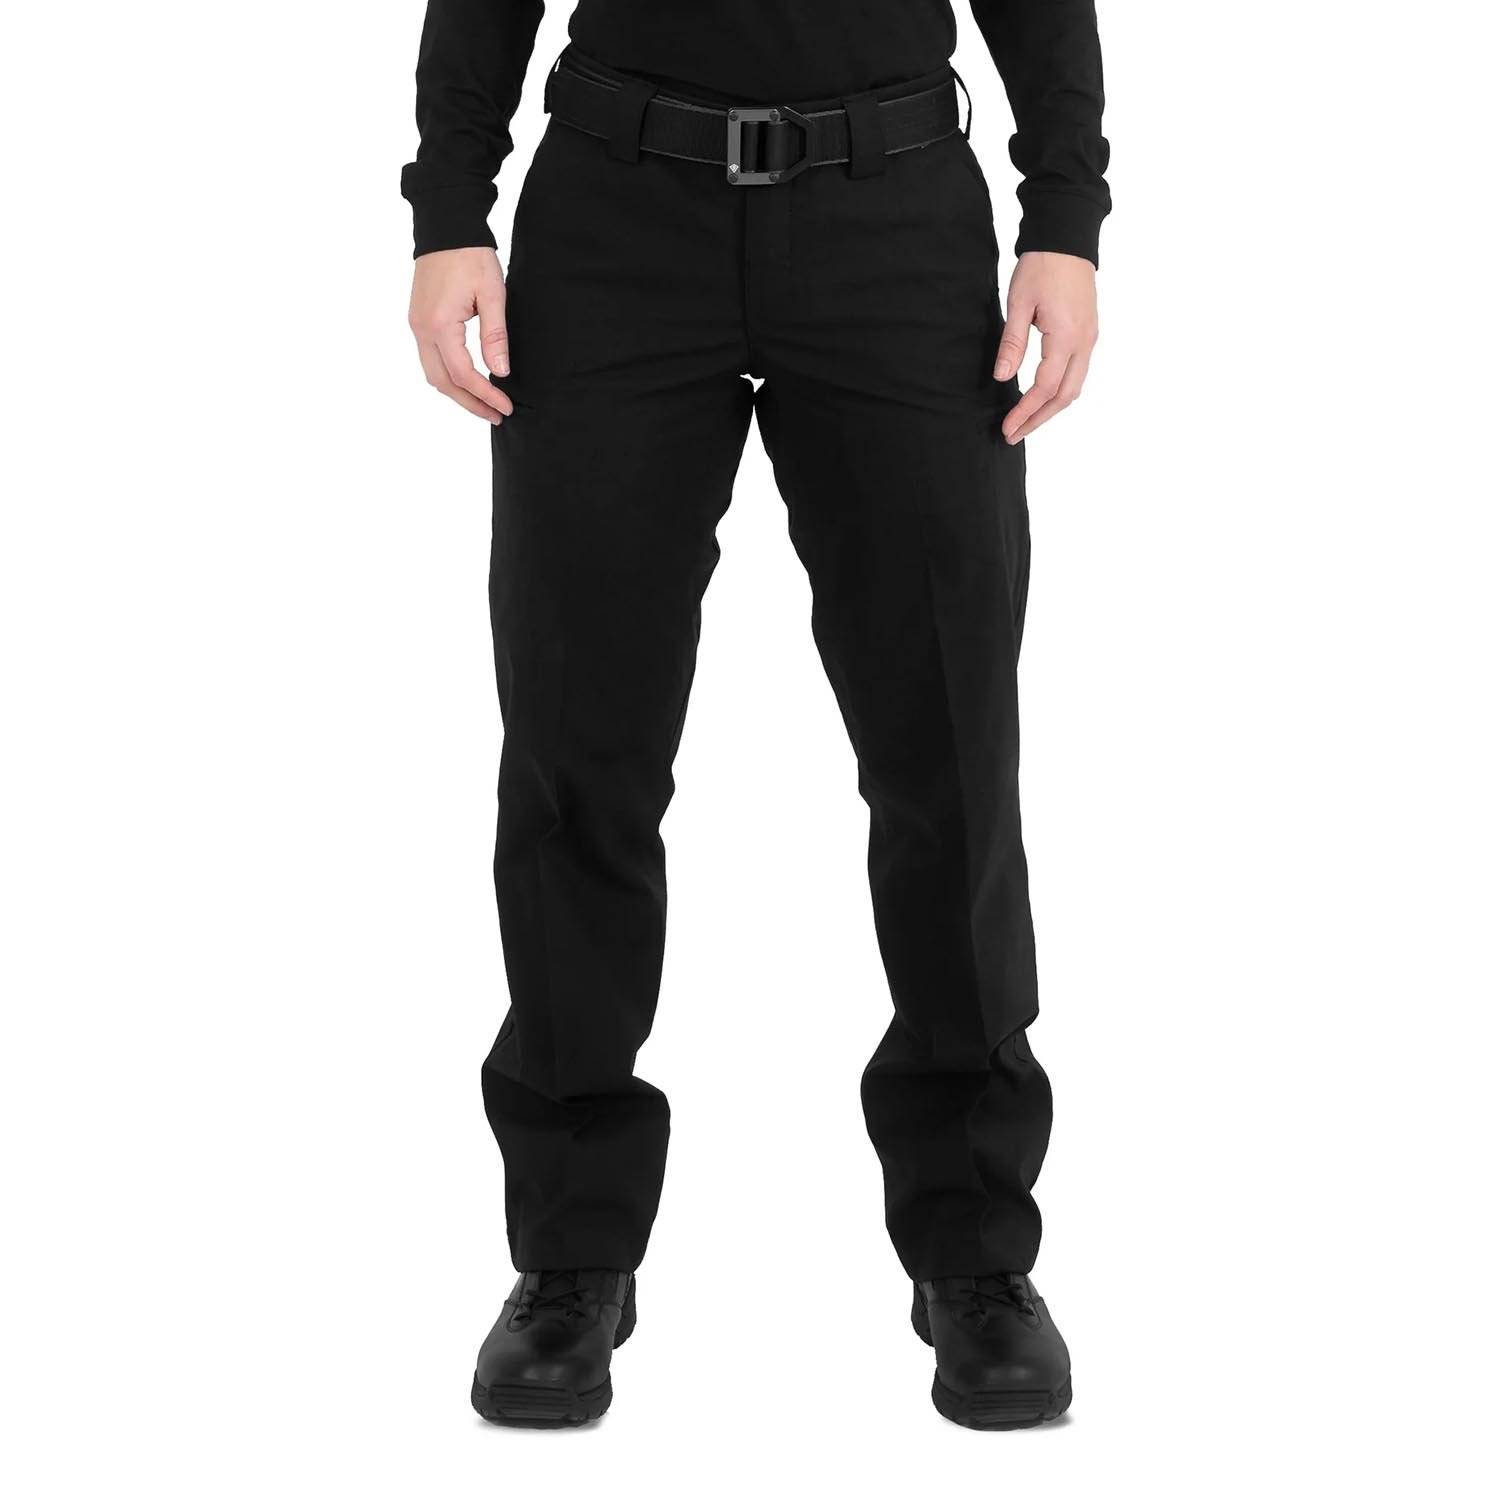 Women's V2 EMS Pant, First Tactical